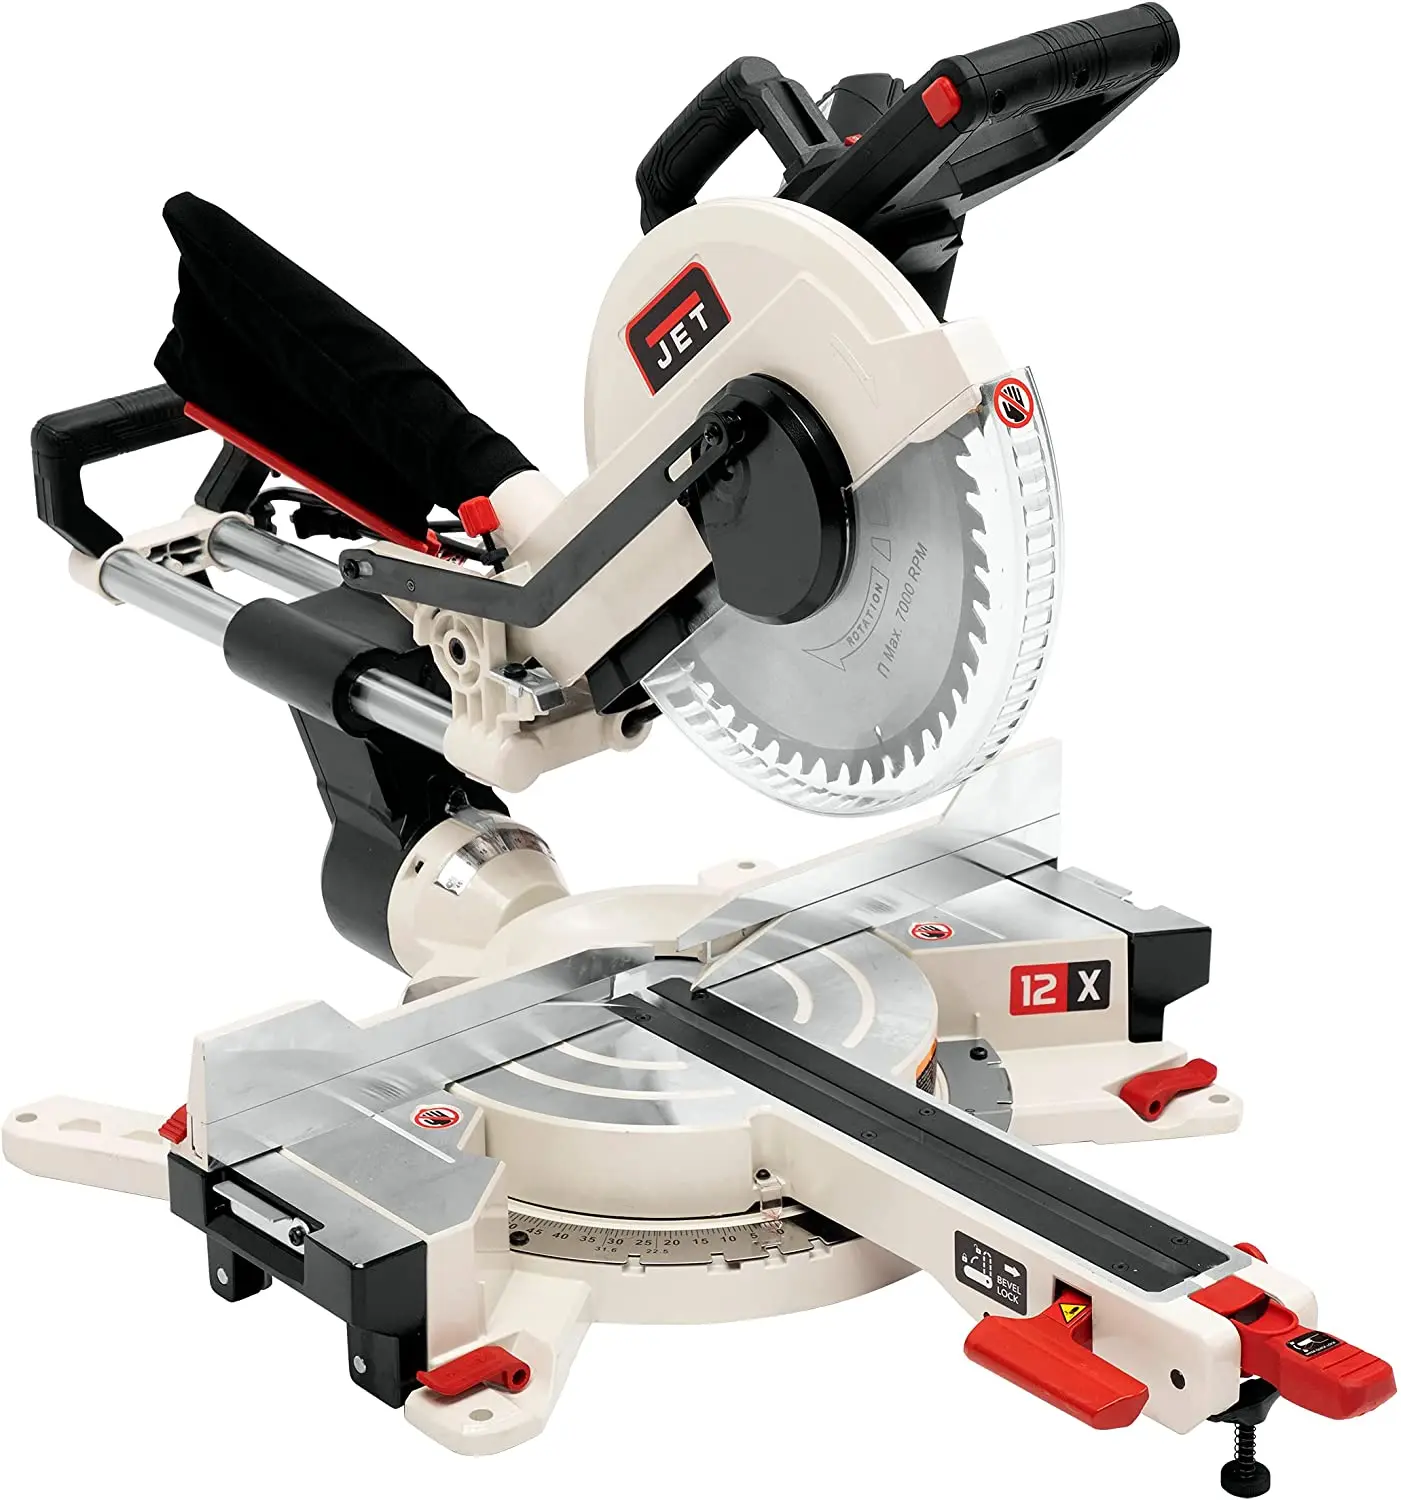 

New Low price JET JMS-12X, 12-Inch Sliding Dual-Bevel Compound Miter Saw (707212) Metal wall plate